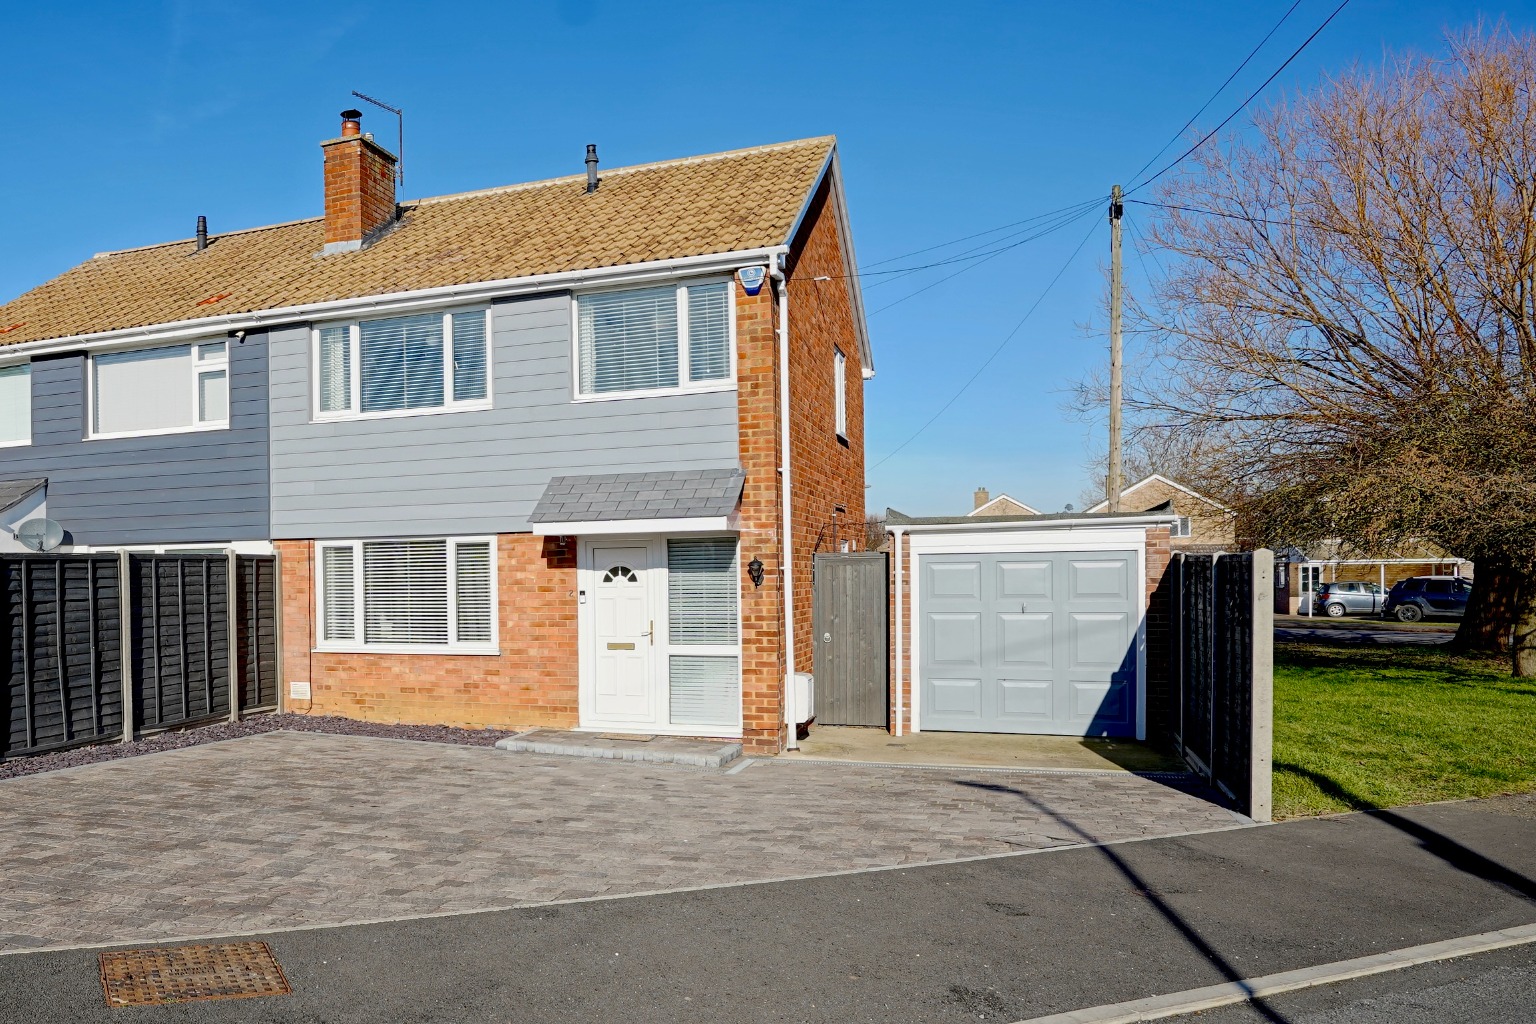 3 bed semi-detached house for sale in Hawthorn Way, St Ives - Property Image 1